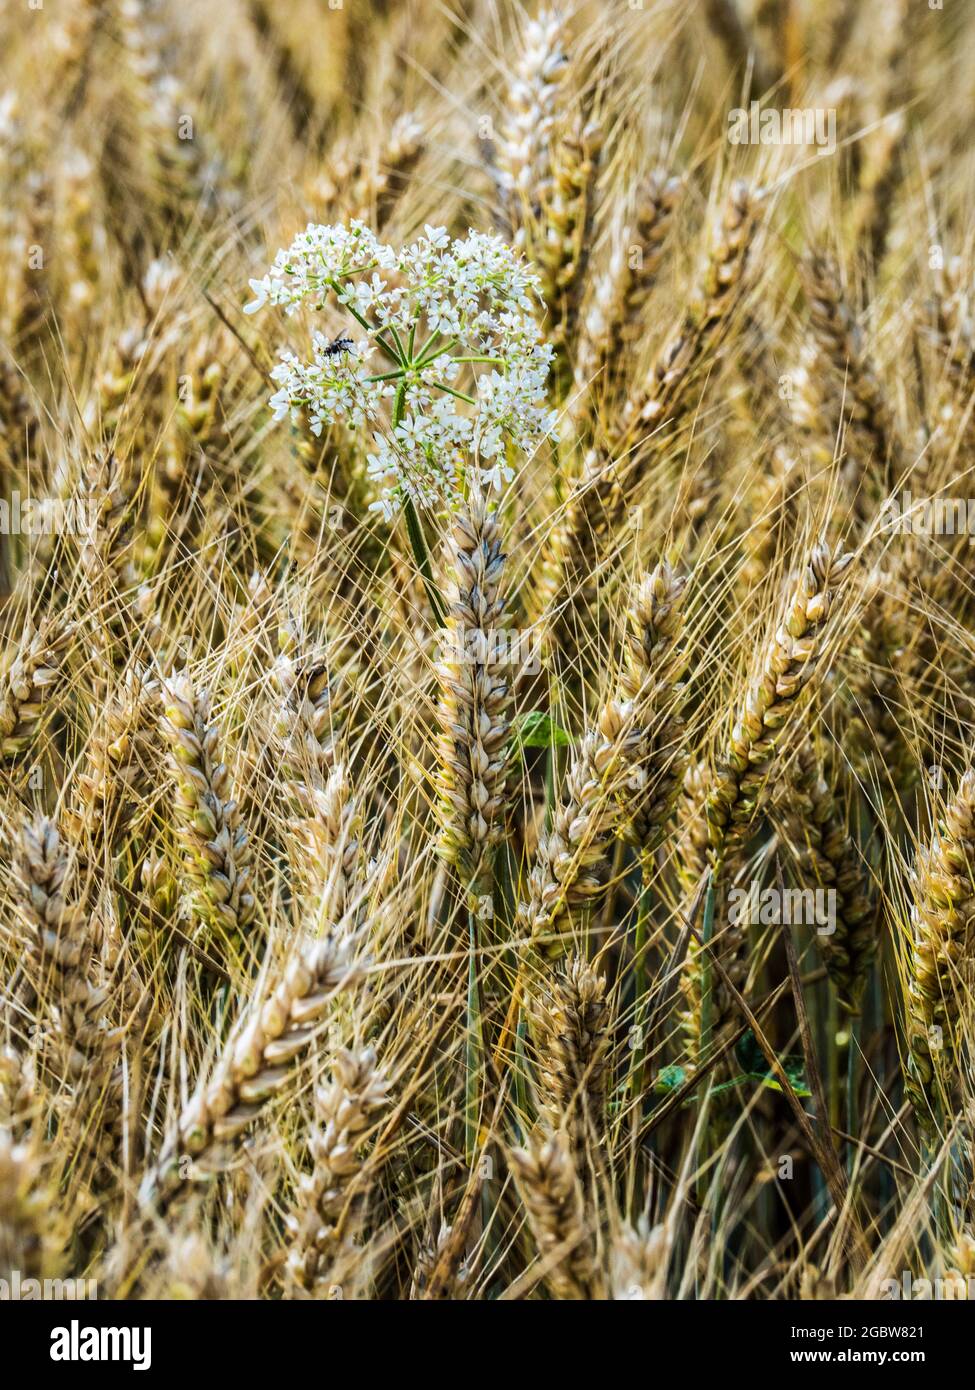 Cow parsley growing in a wheat field. Stock Photo